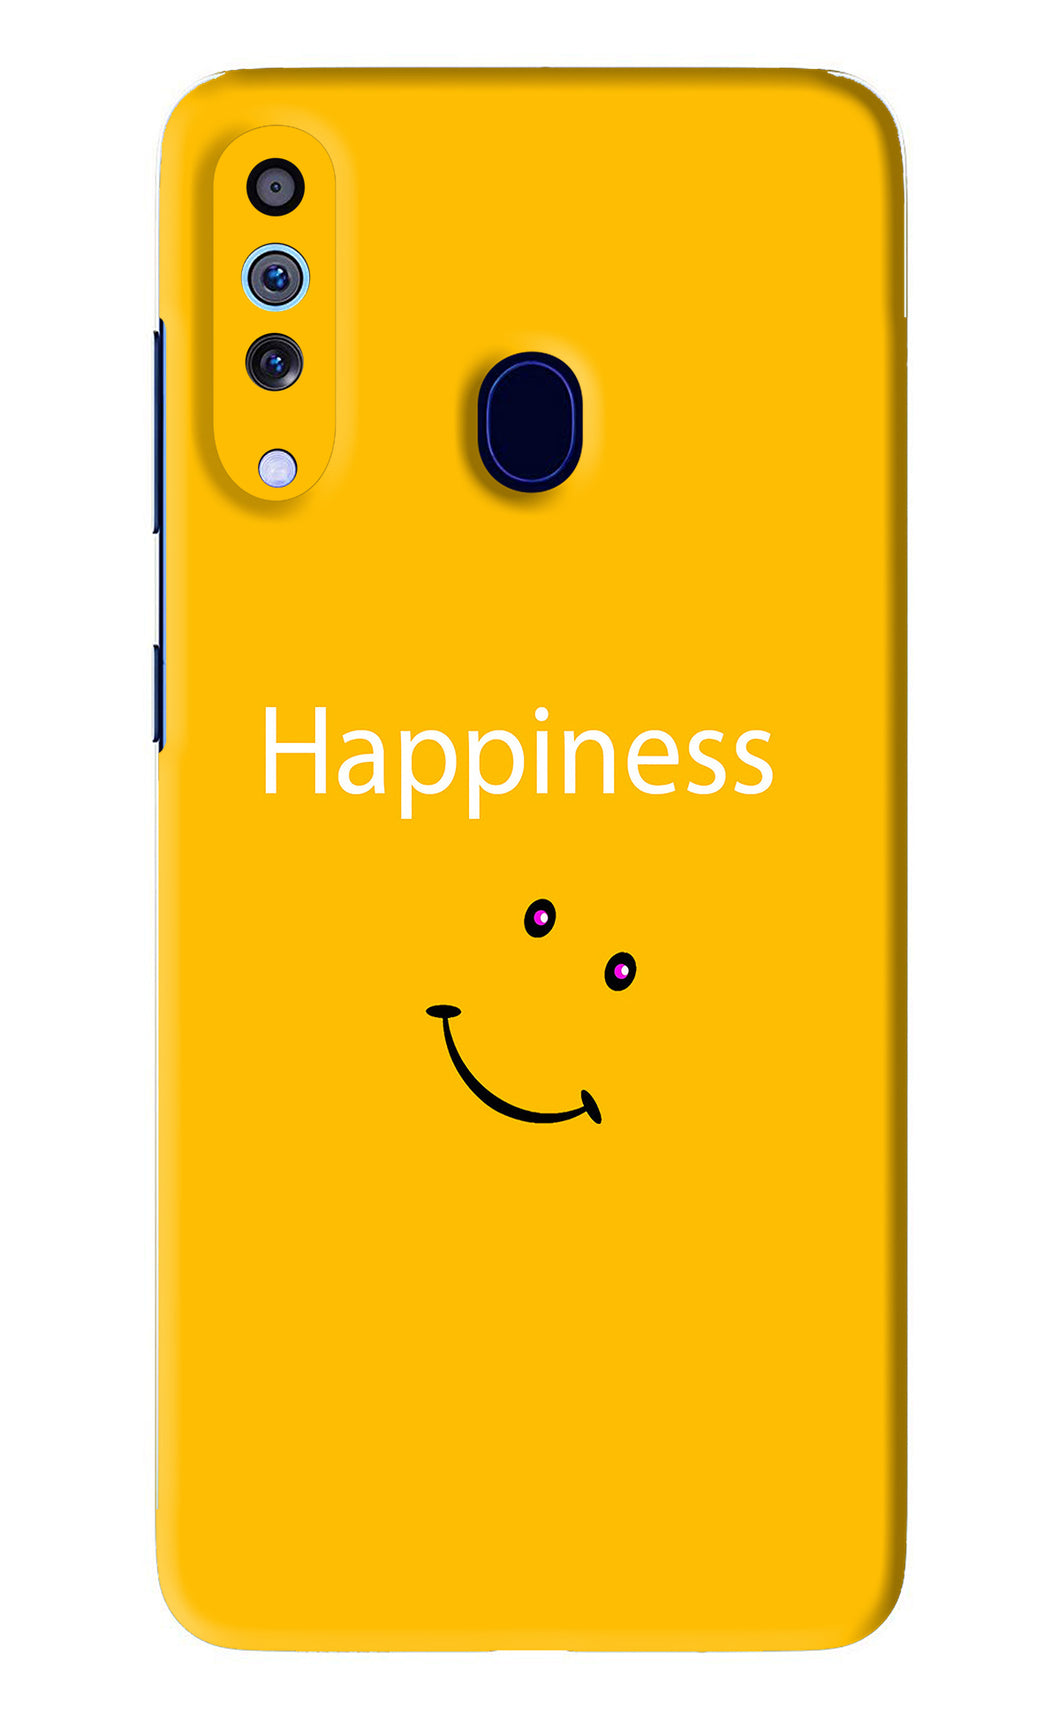 Happiness With Smiley Samsung Galaxy M40 Back Skin Wrap